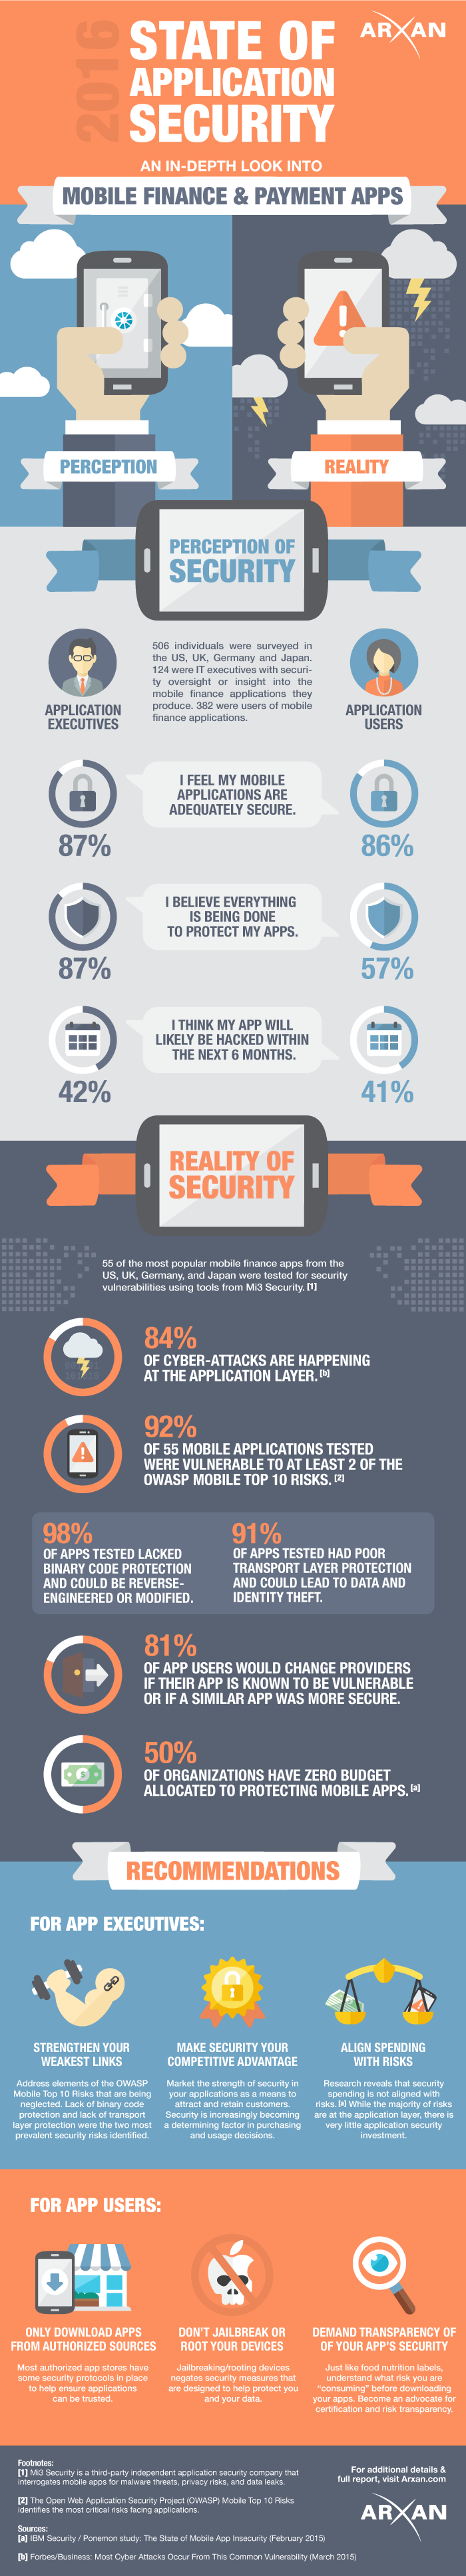 The State of Application Security for Mobile Finance and Payments Apps